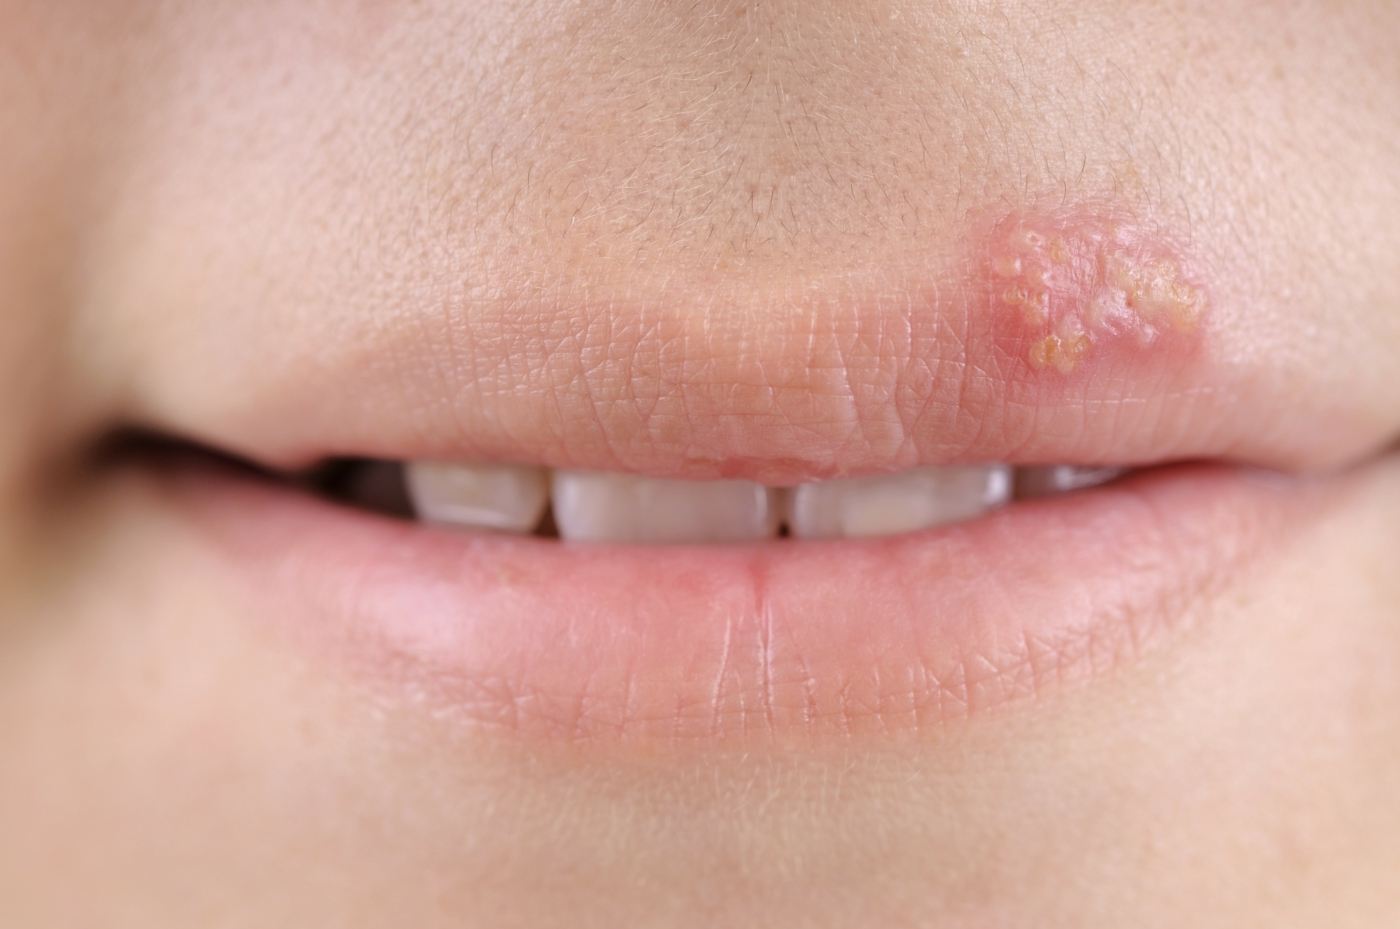 Typical for lip herpes and other herpes types are the small blisters on the skin